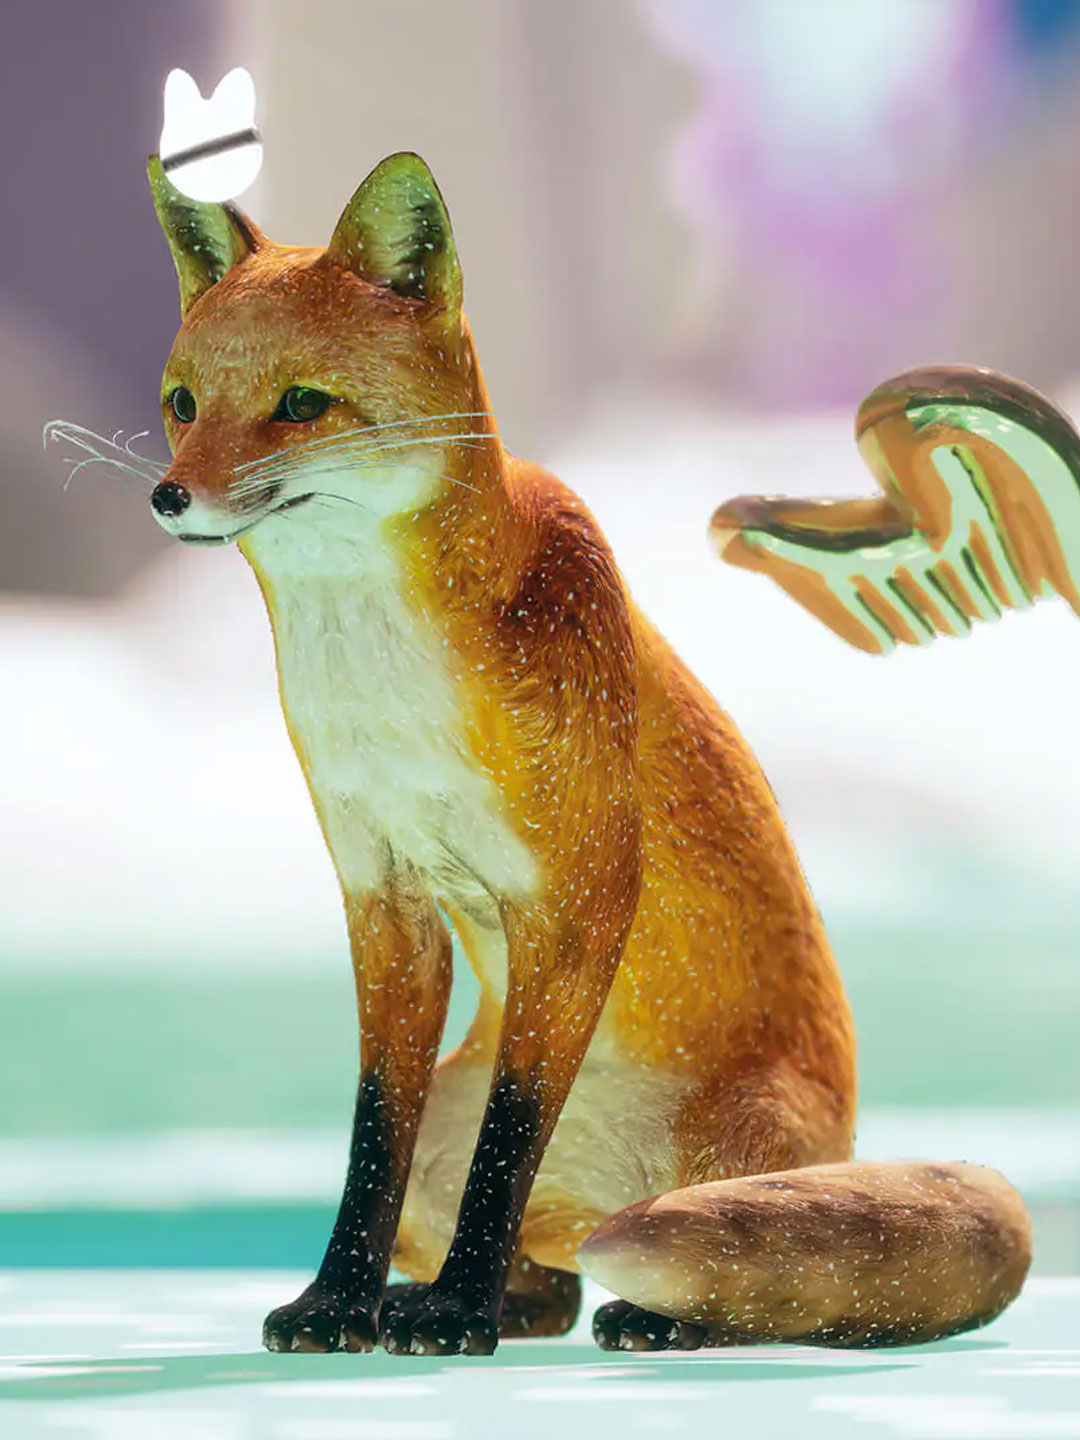 A BMW metaverse figure of a fox with wings sitting on a light green flat surface